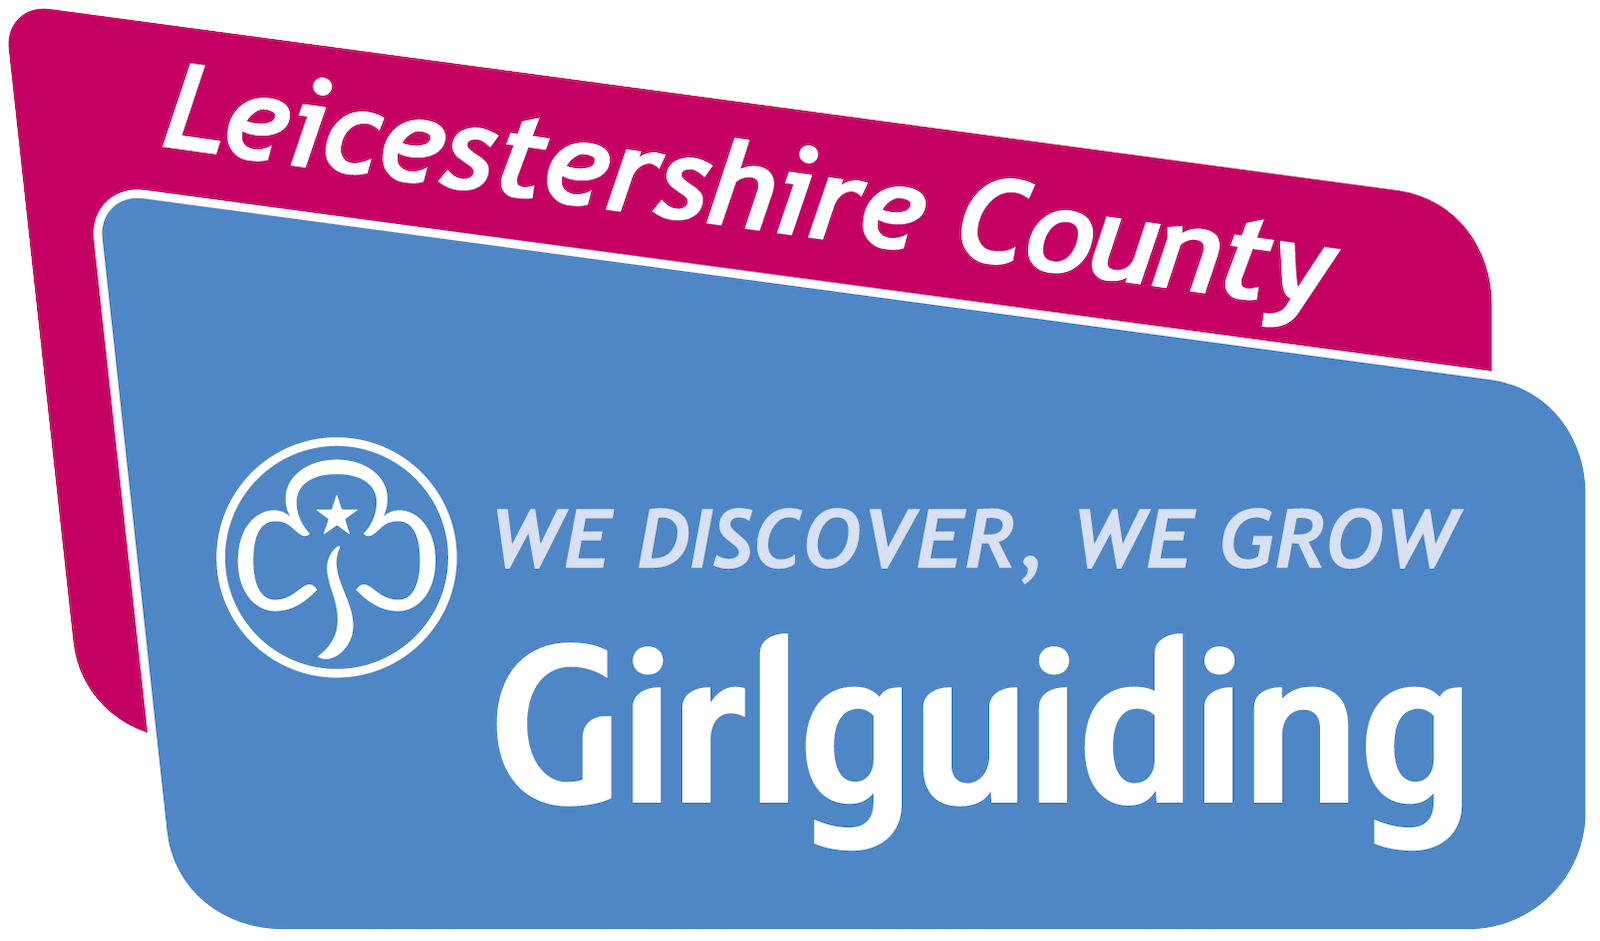 leicestershire county logo (bottom right)